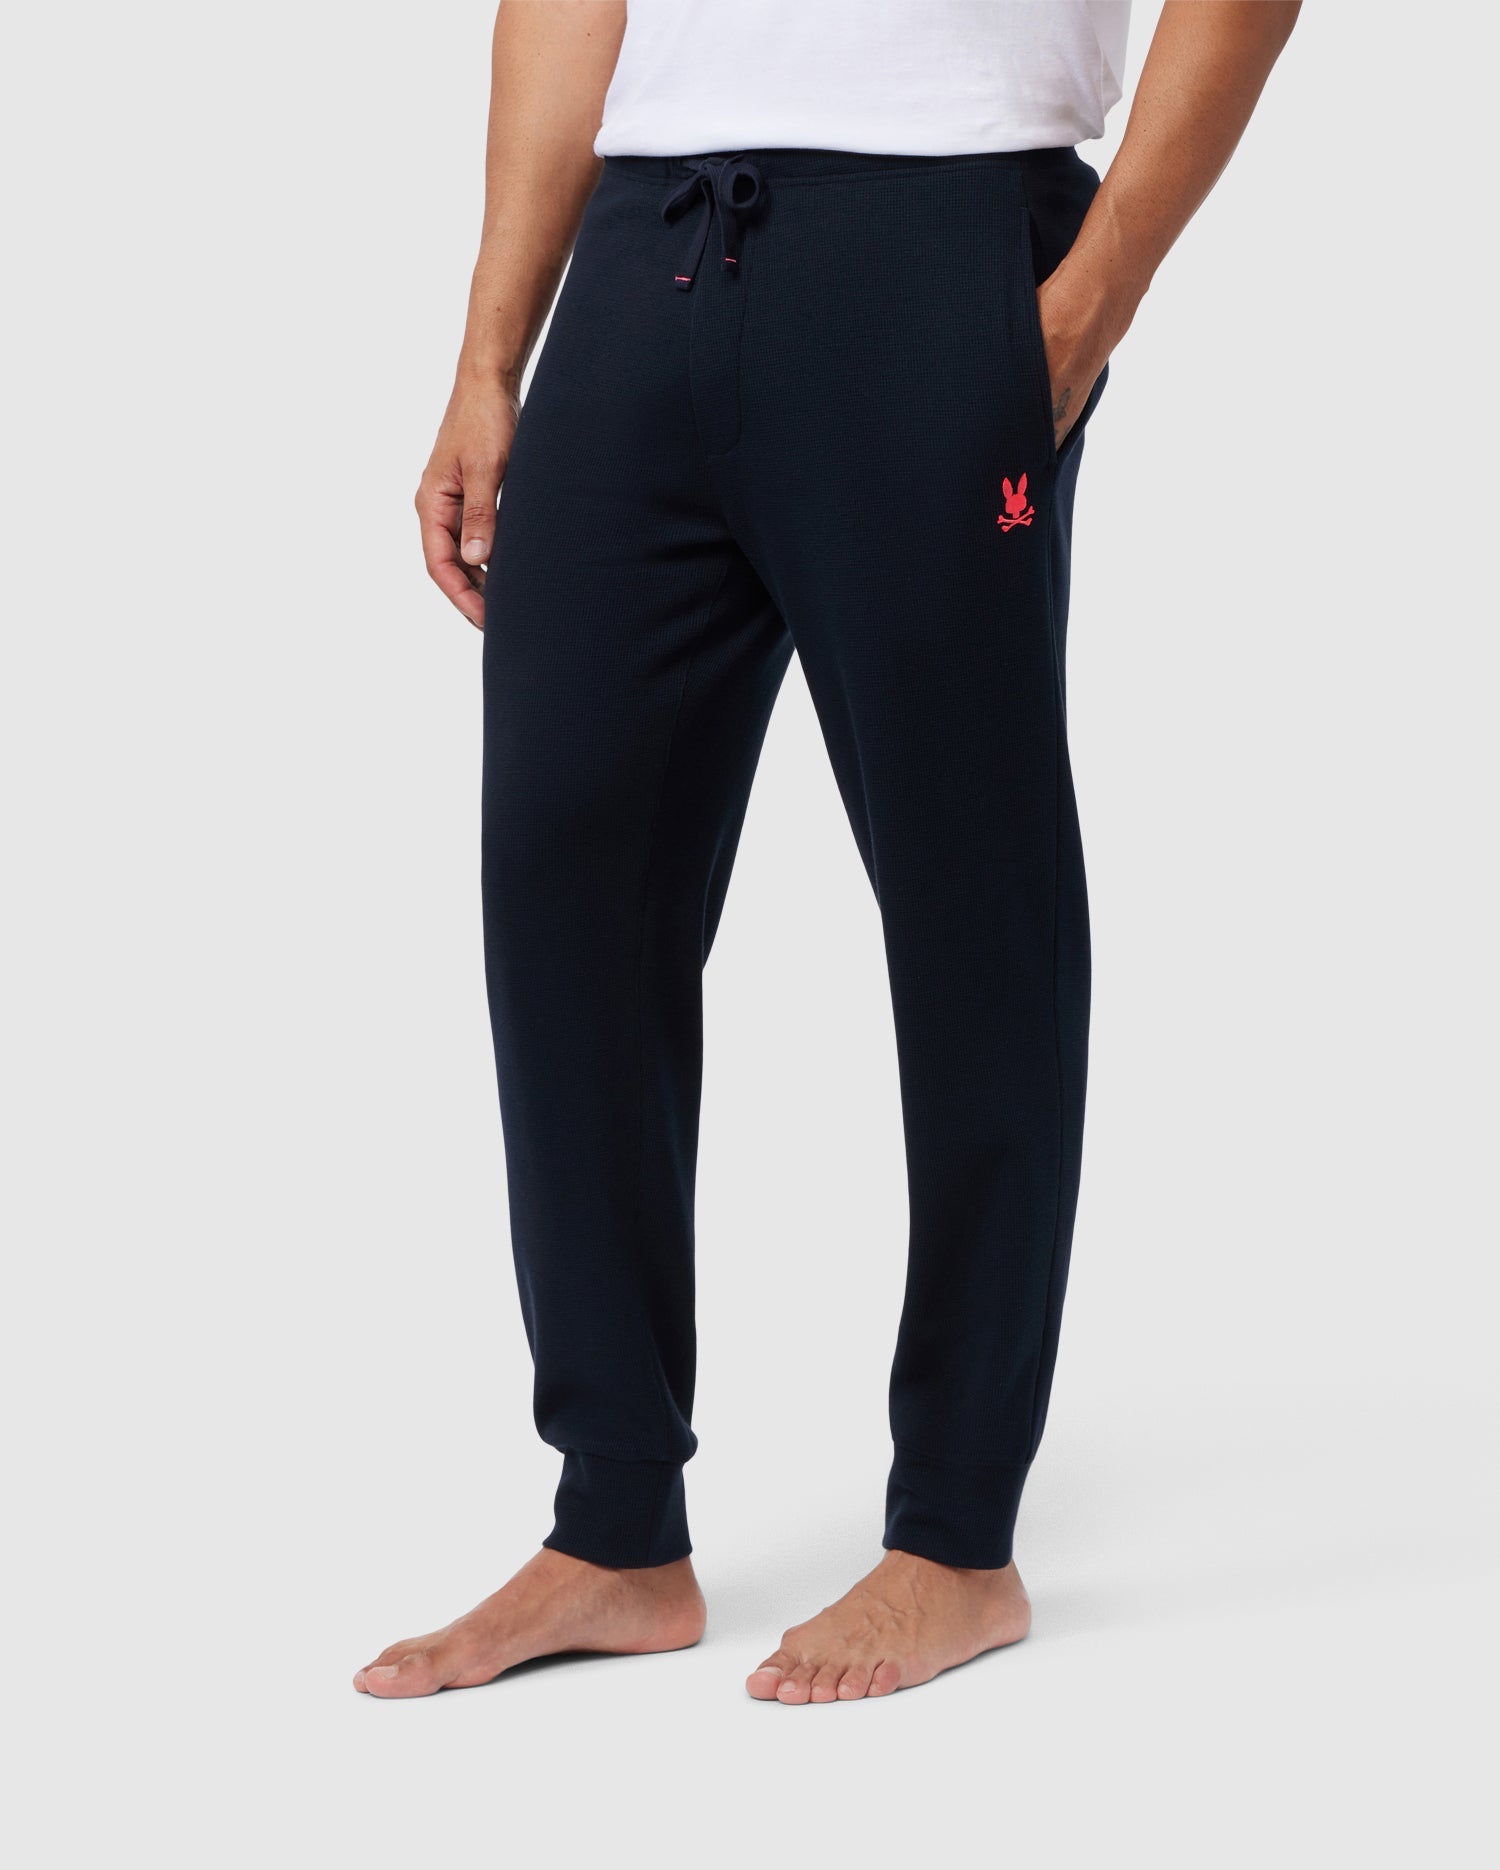 MENS FRENCH TERRY SWEATPANTS - B6P828Z1FT